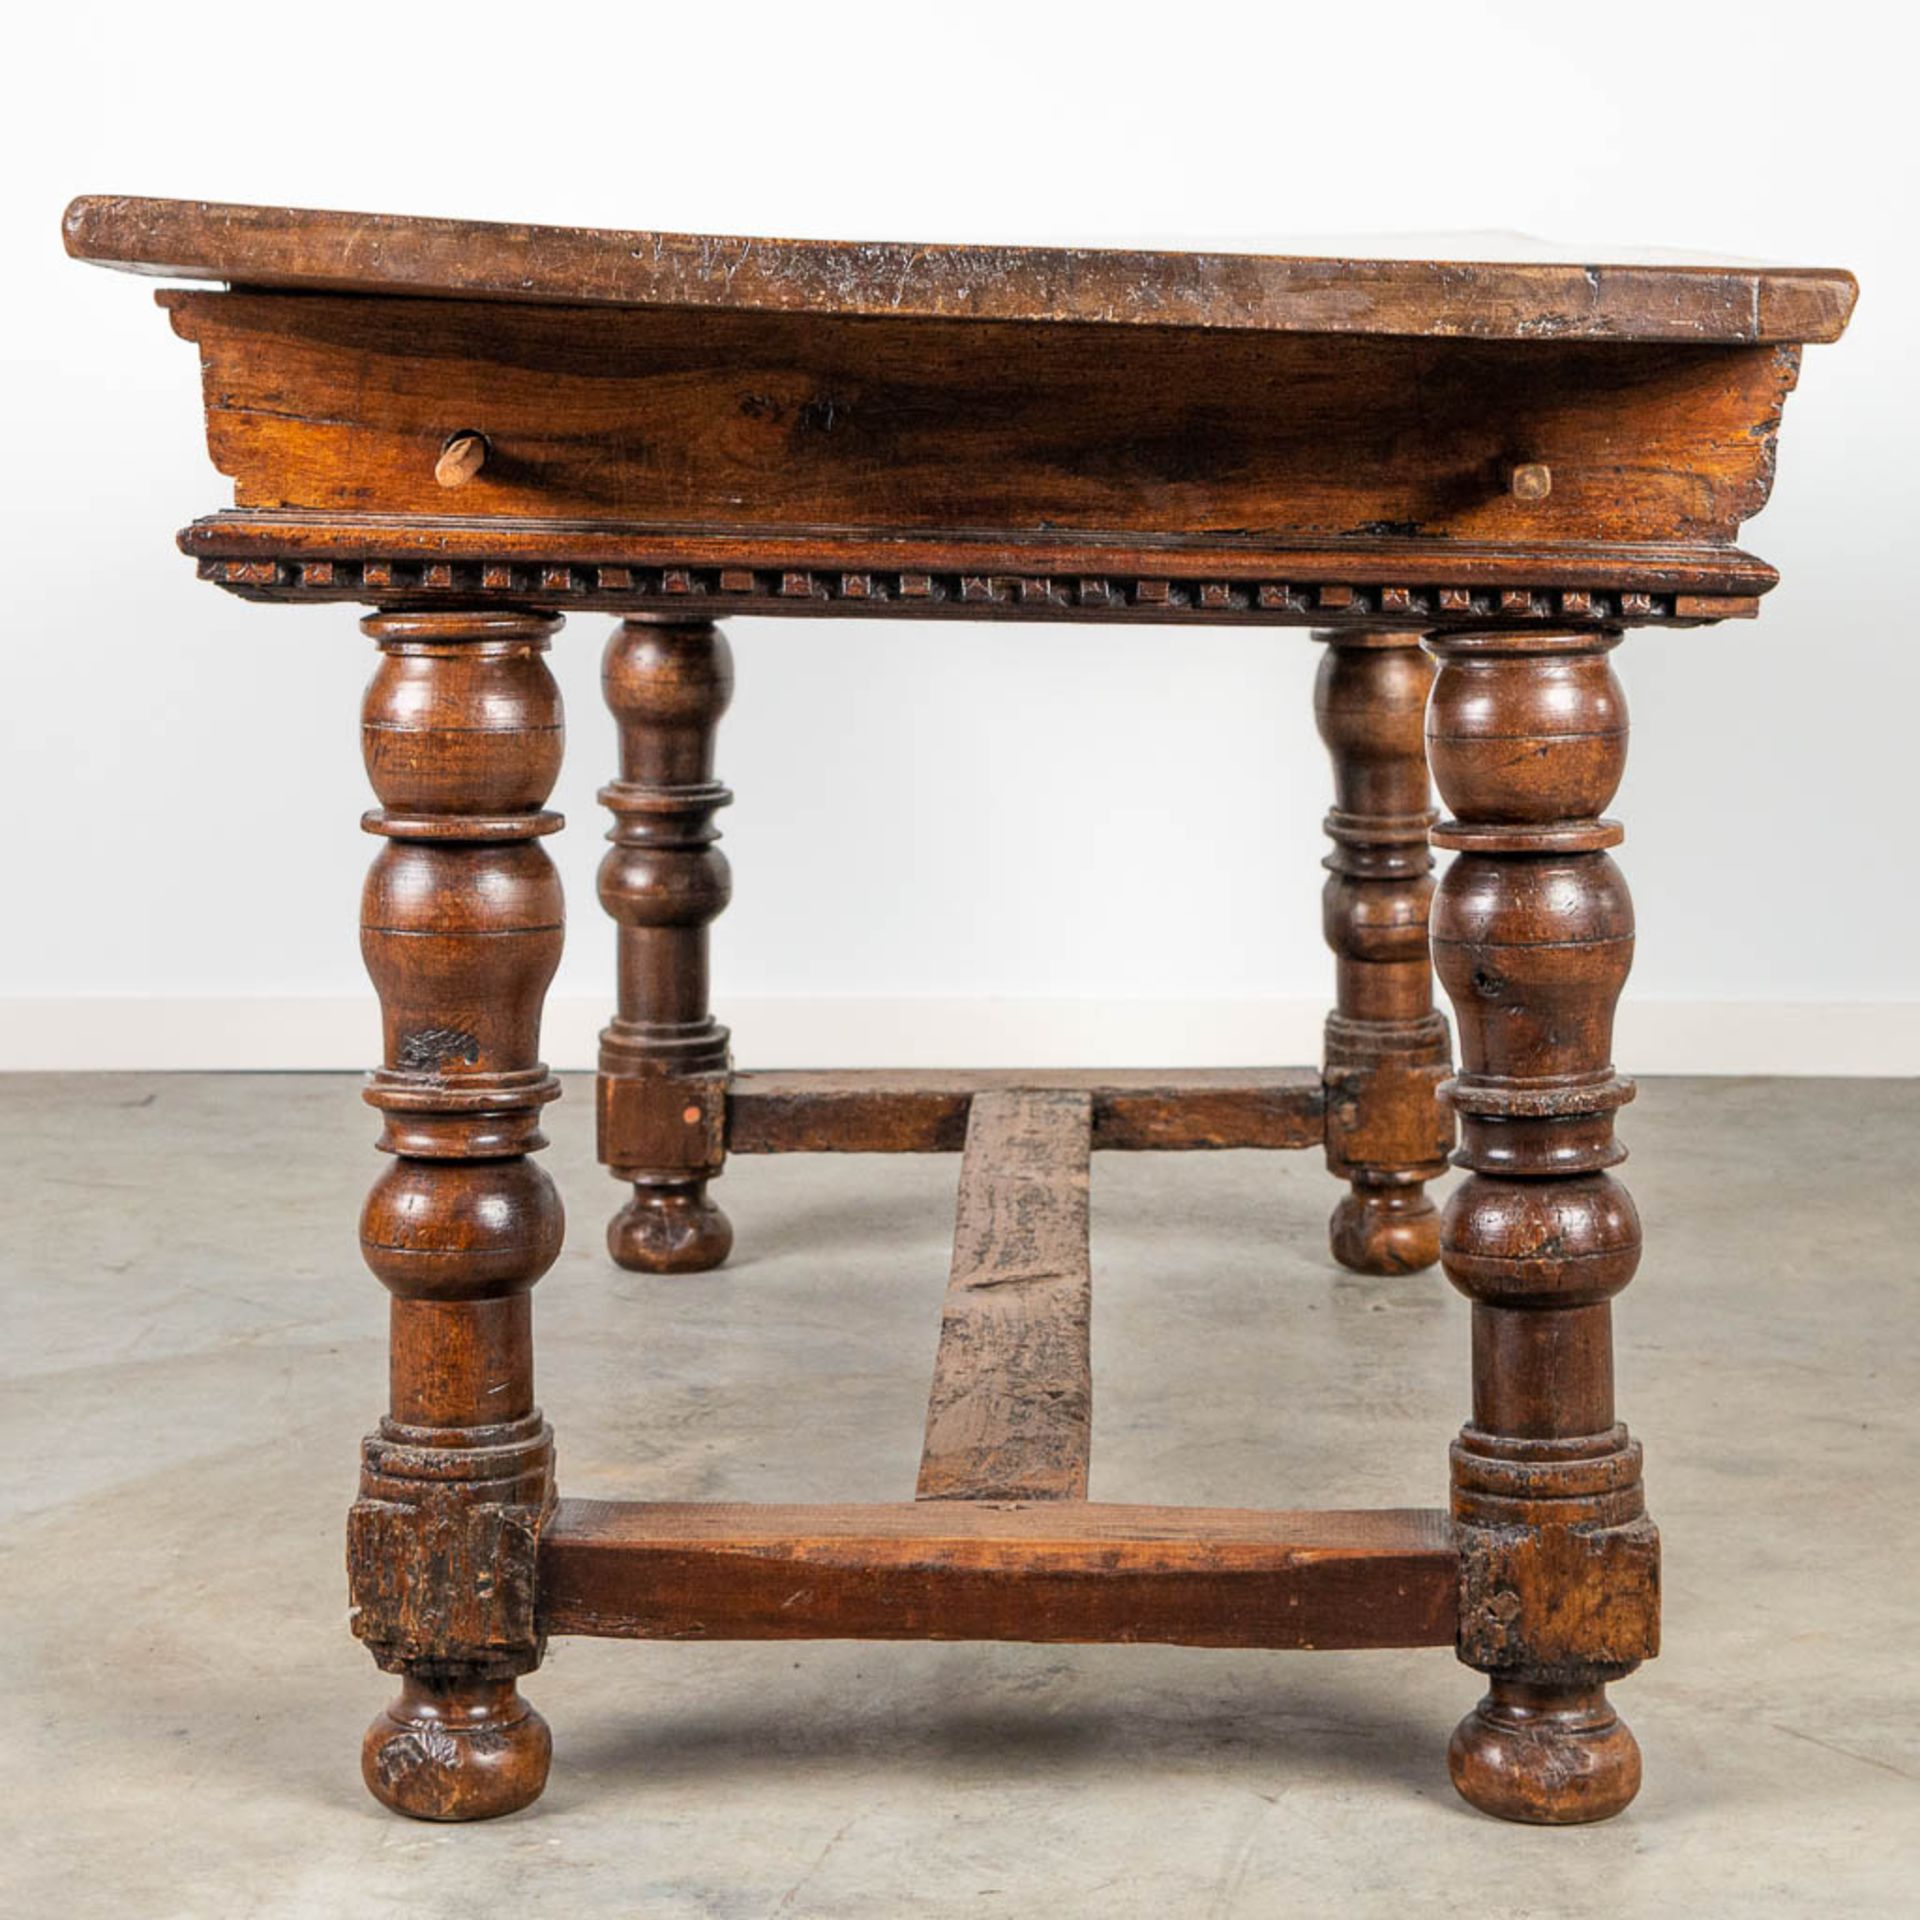 An antique table with 6 drawers, made during the 17th century. - Image 3 of 12